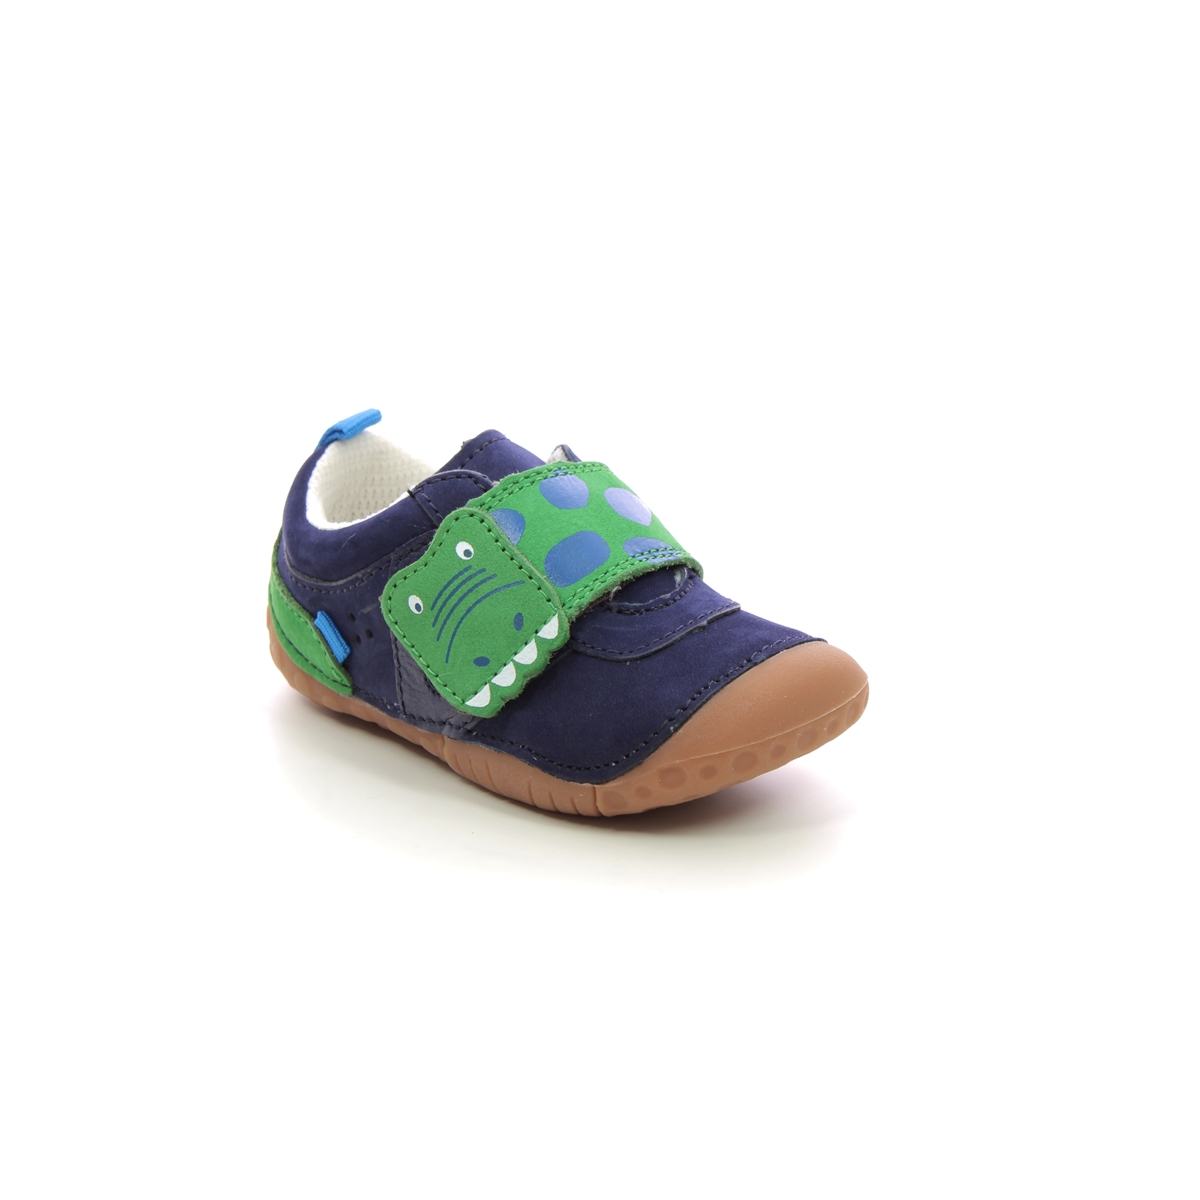 Start Rite - Little Mate 1V In Navy Leather 0819-97G In Size 4 In Plain Navy Leather Boys First And Toddler Shoes  In Navy Leather For kids